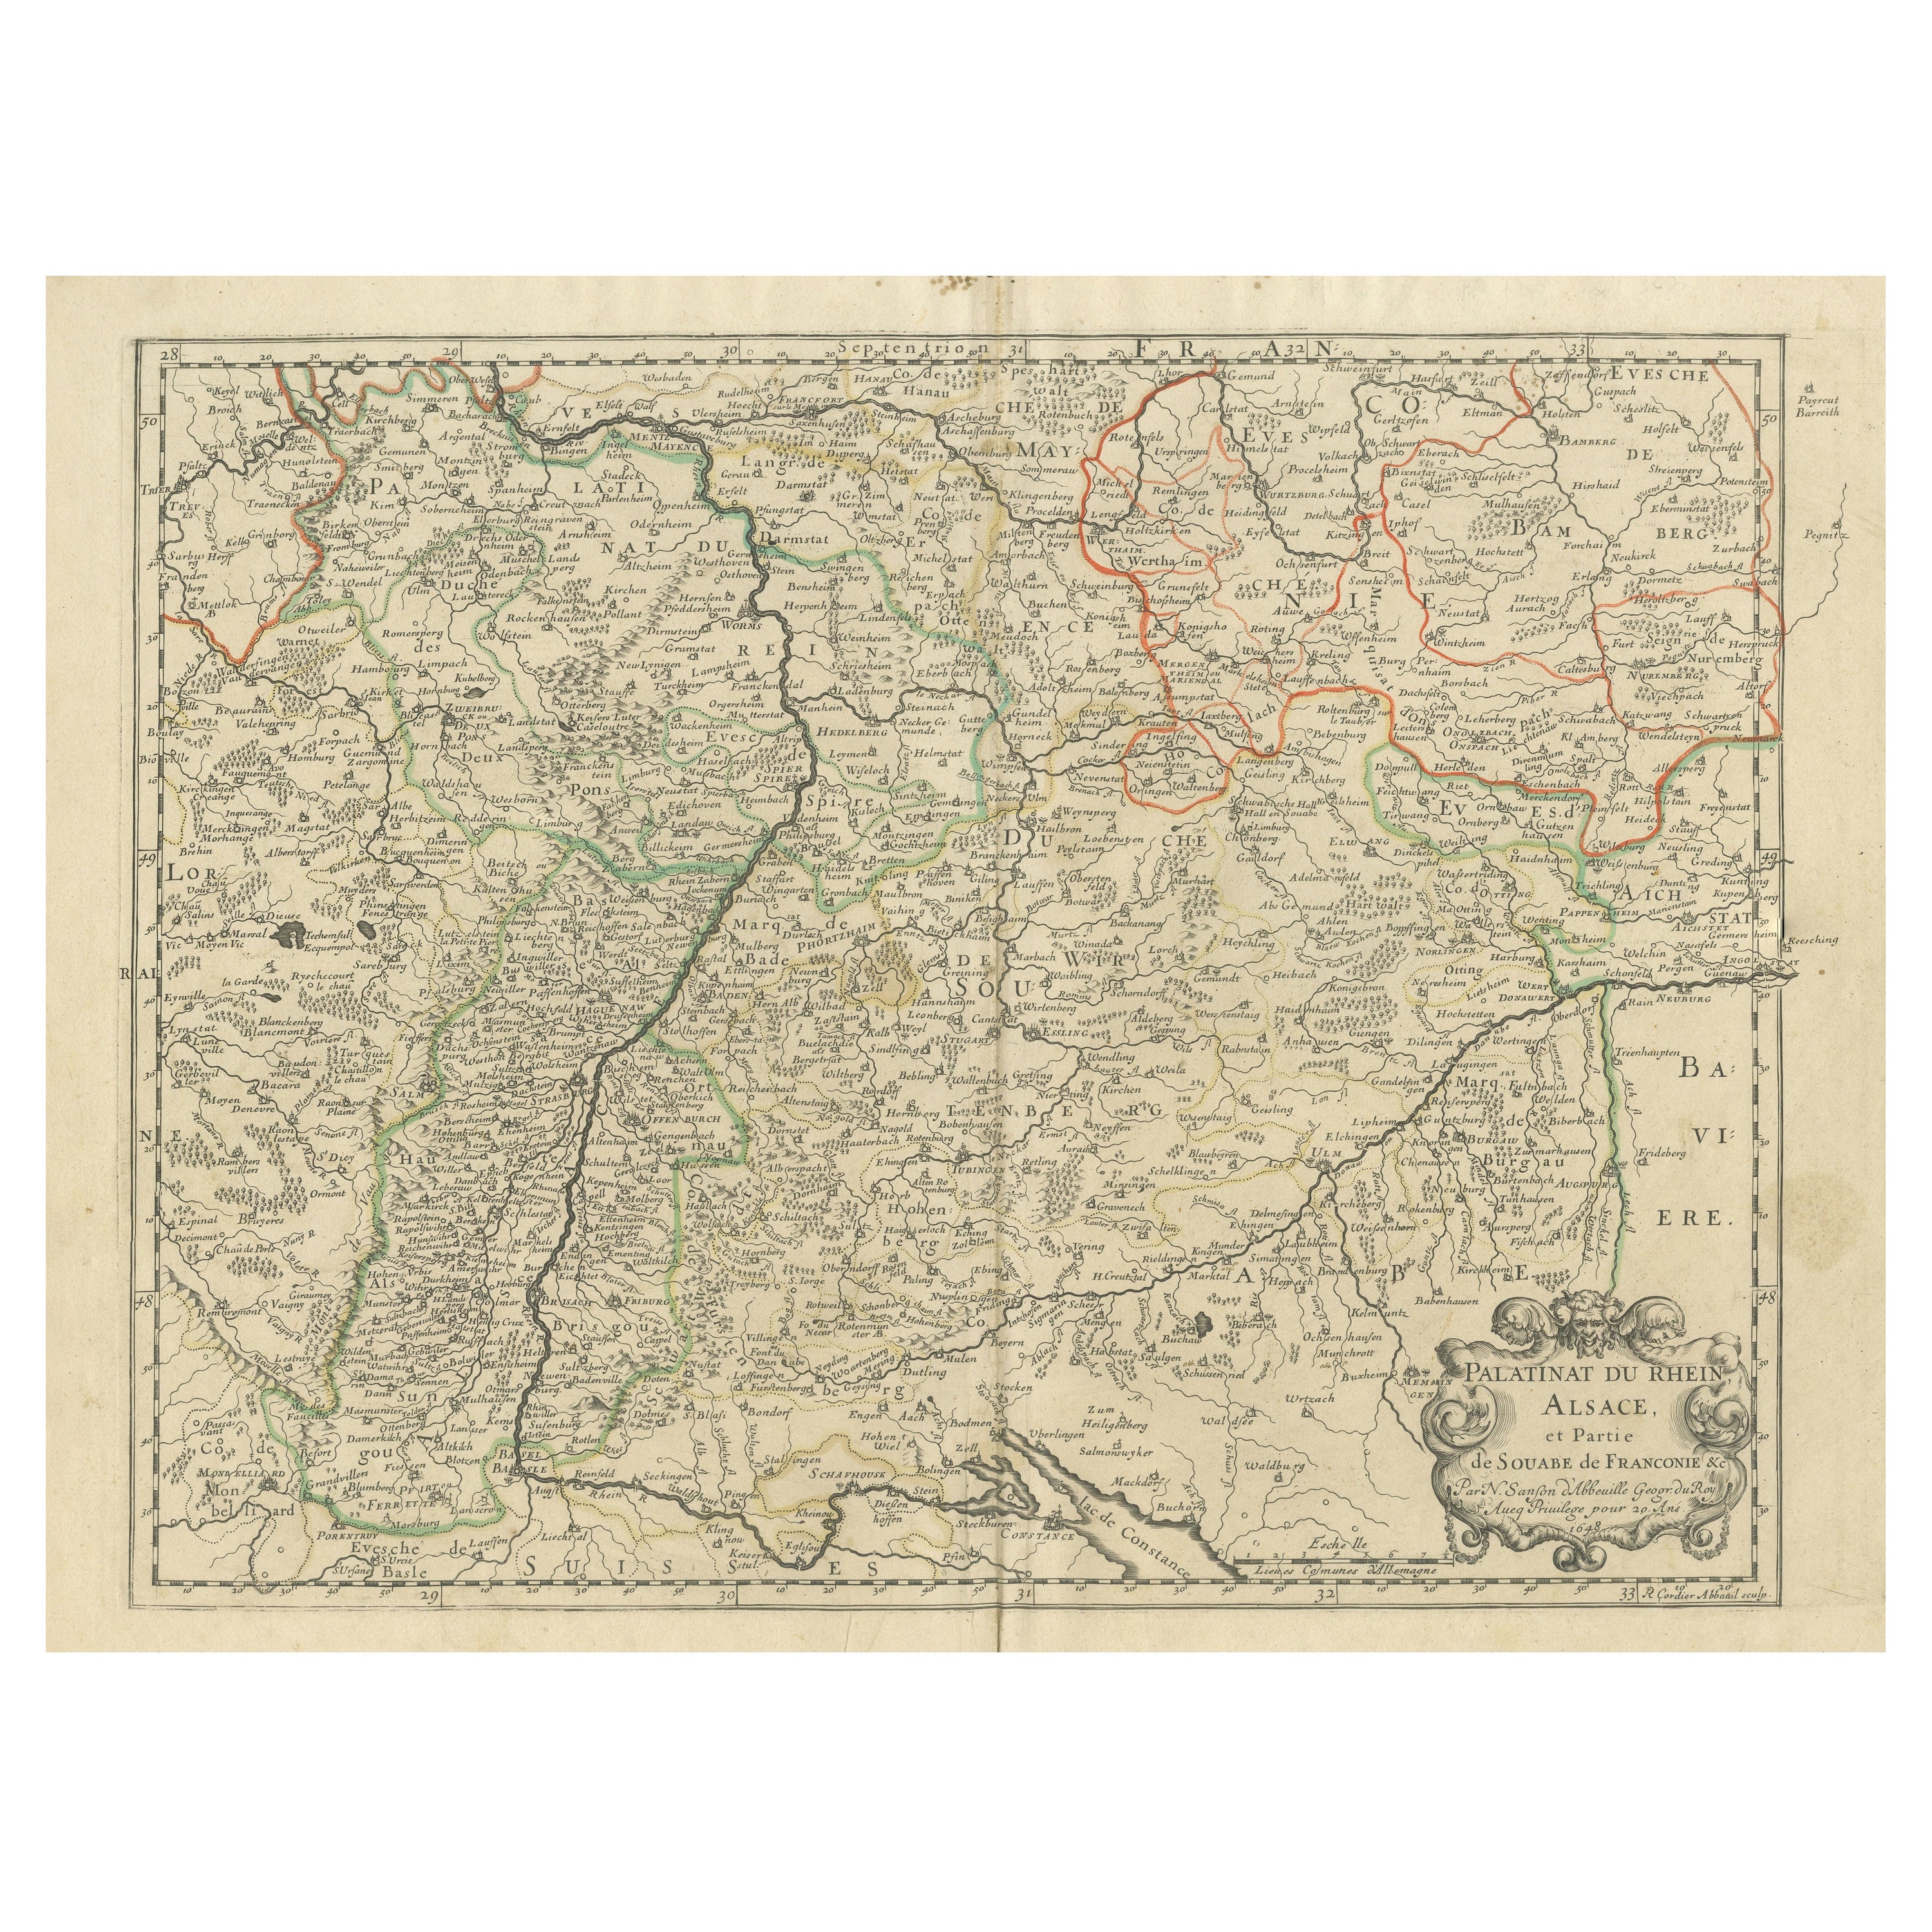 Antique Map of the Rhineland and Alsace Region with Original Hand Coloring For Sale